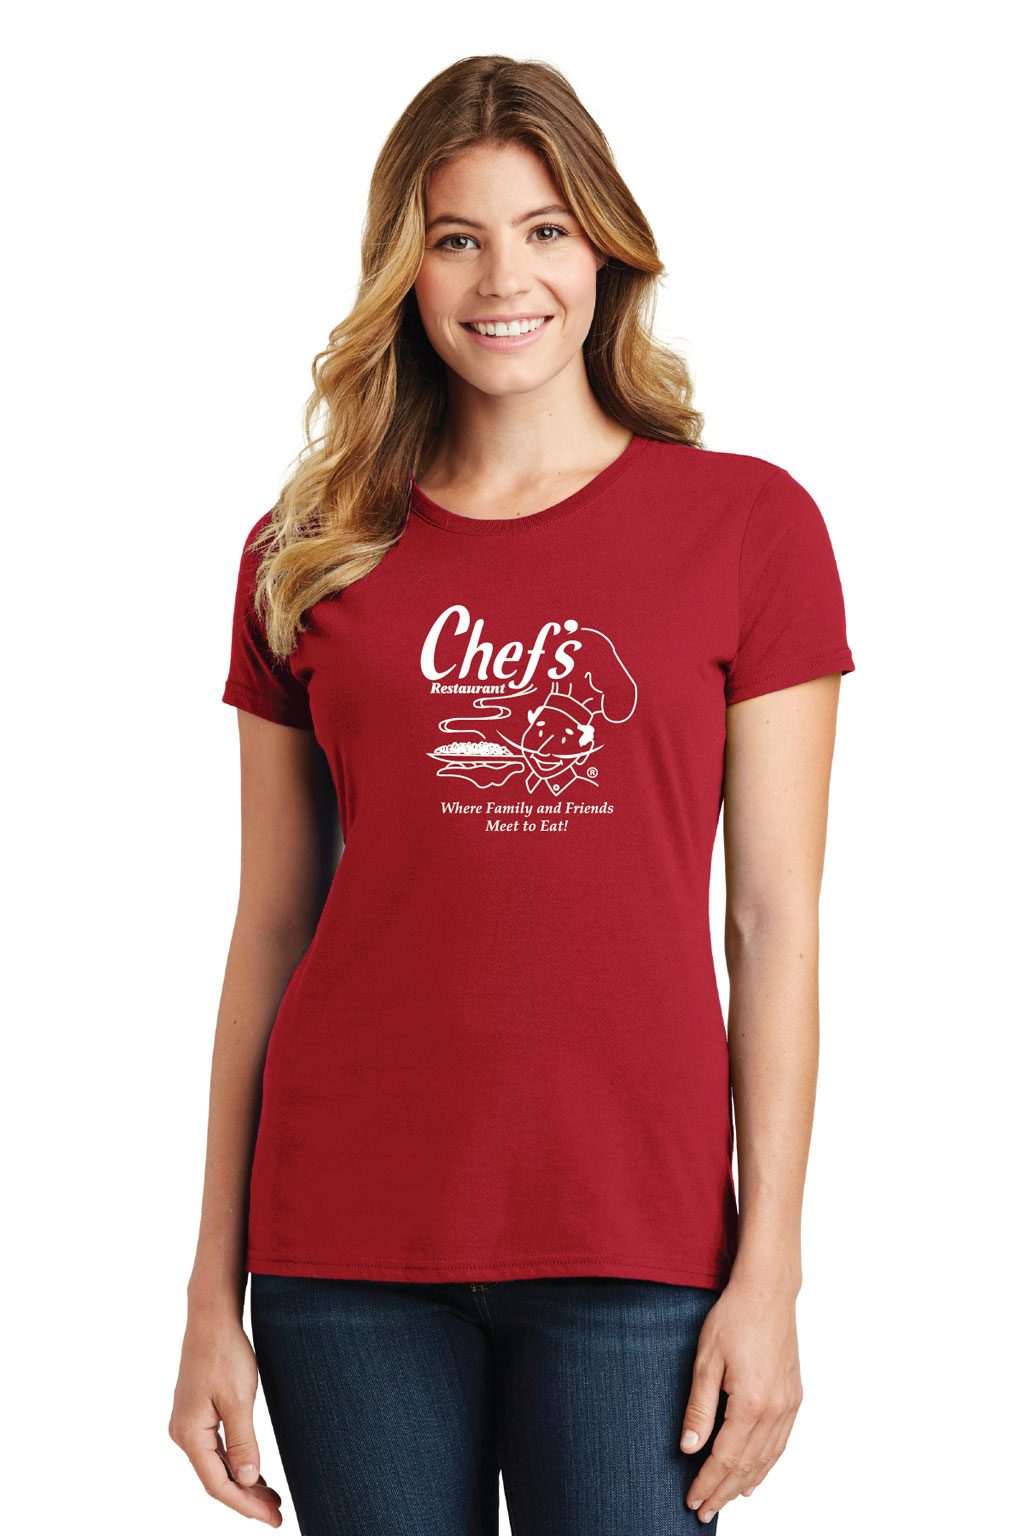 chefs red t-shirt